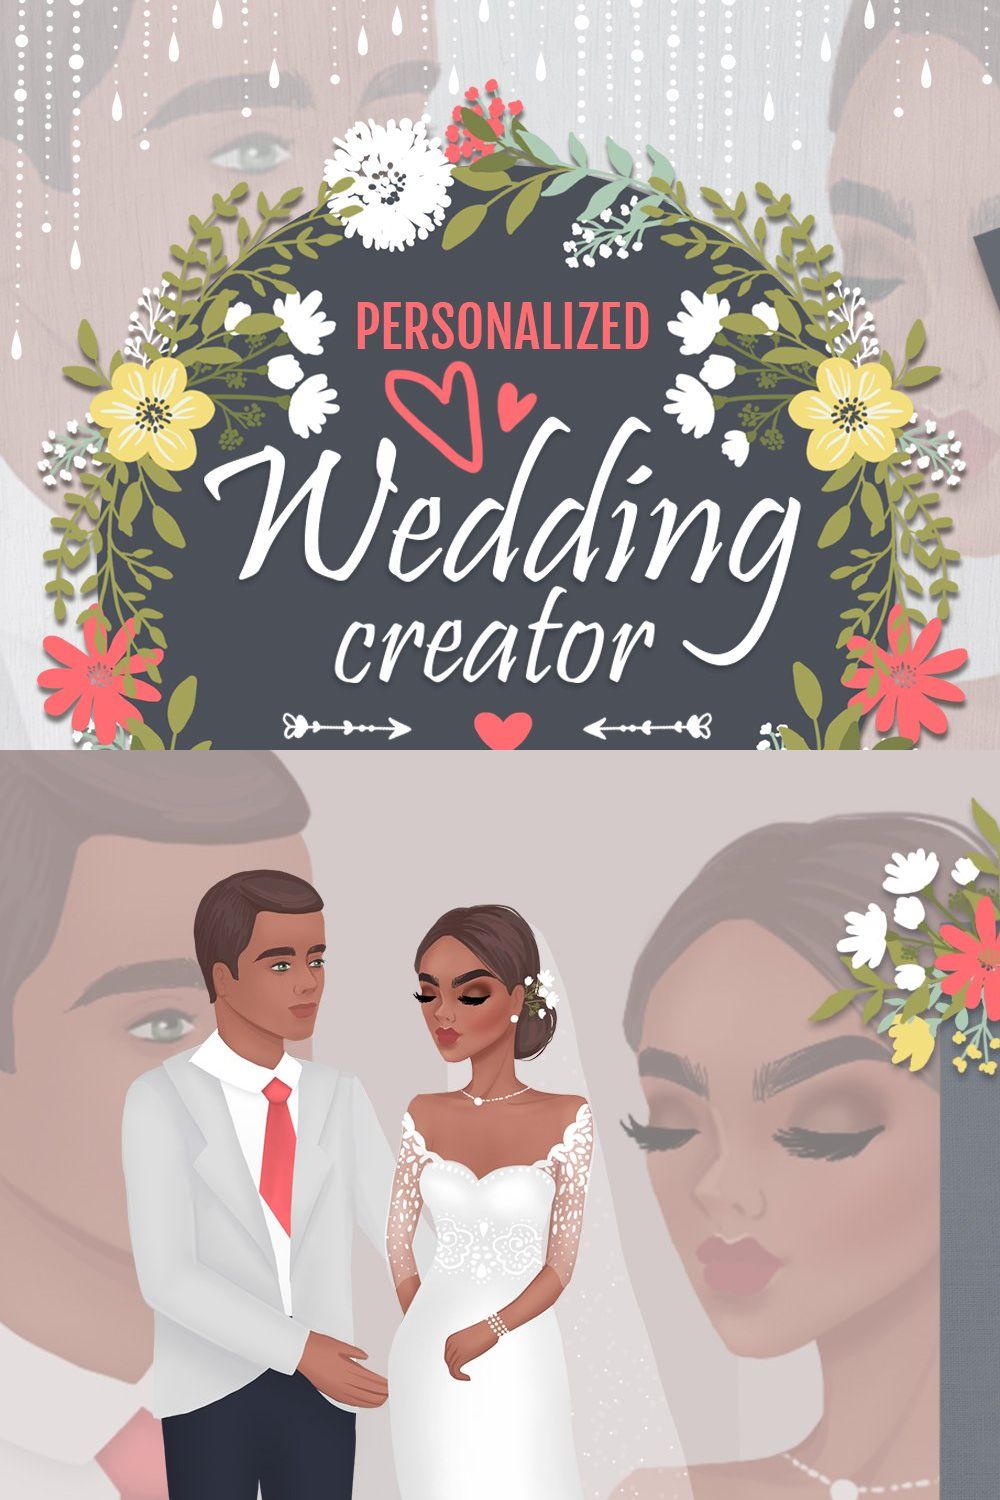 Wedding personalized creator pinterest preview image.